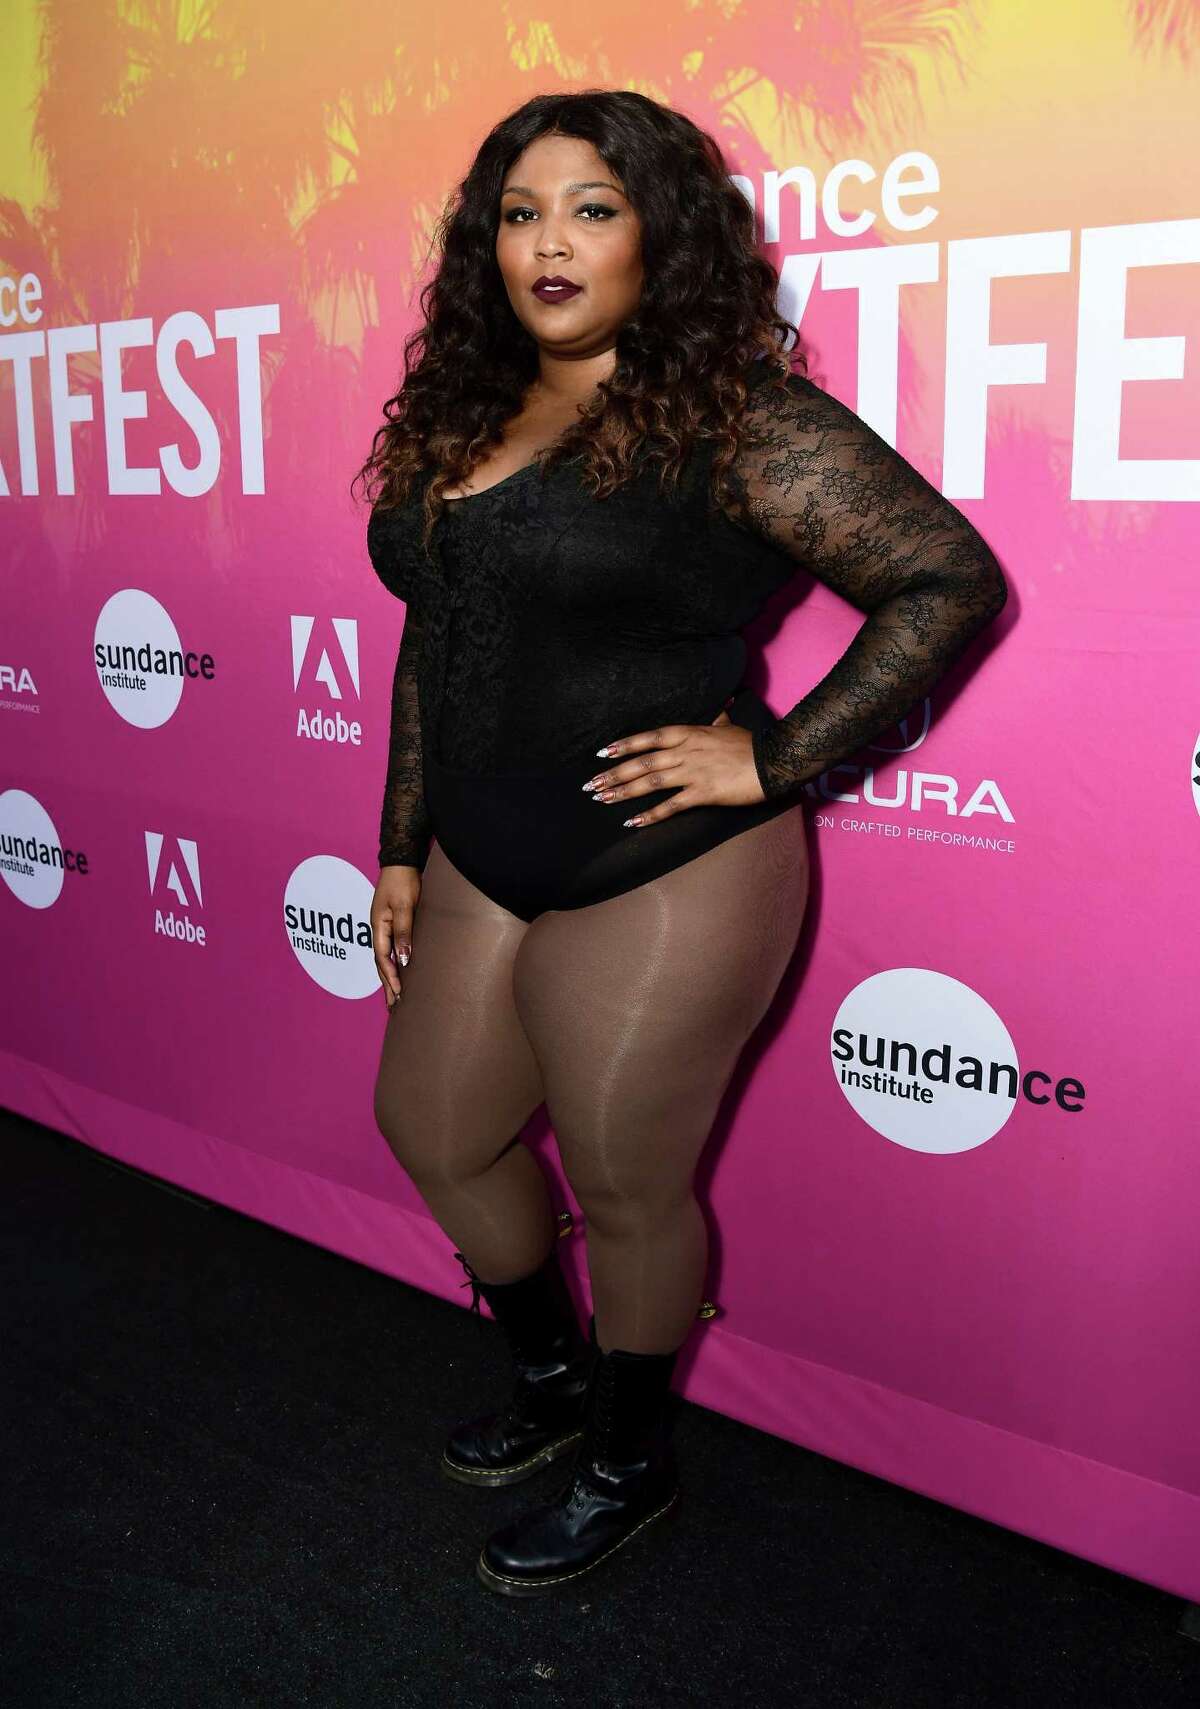 LOS ANGELES, CA - AUGUST 11: Lizzo attends 2017 Sundance NEXT FEST at The Theater at The Ace Hotel on August 11, 2017 in Los Angeles, California.